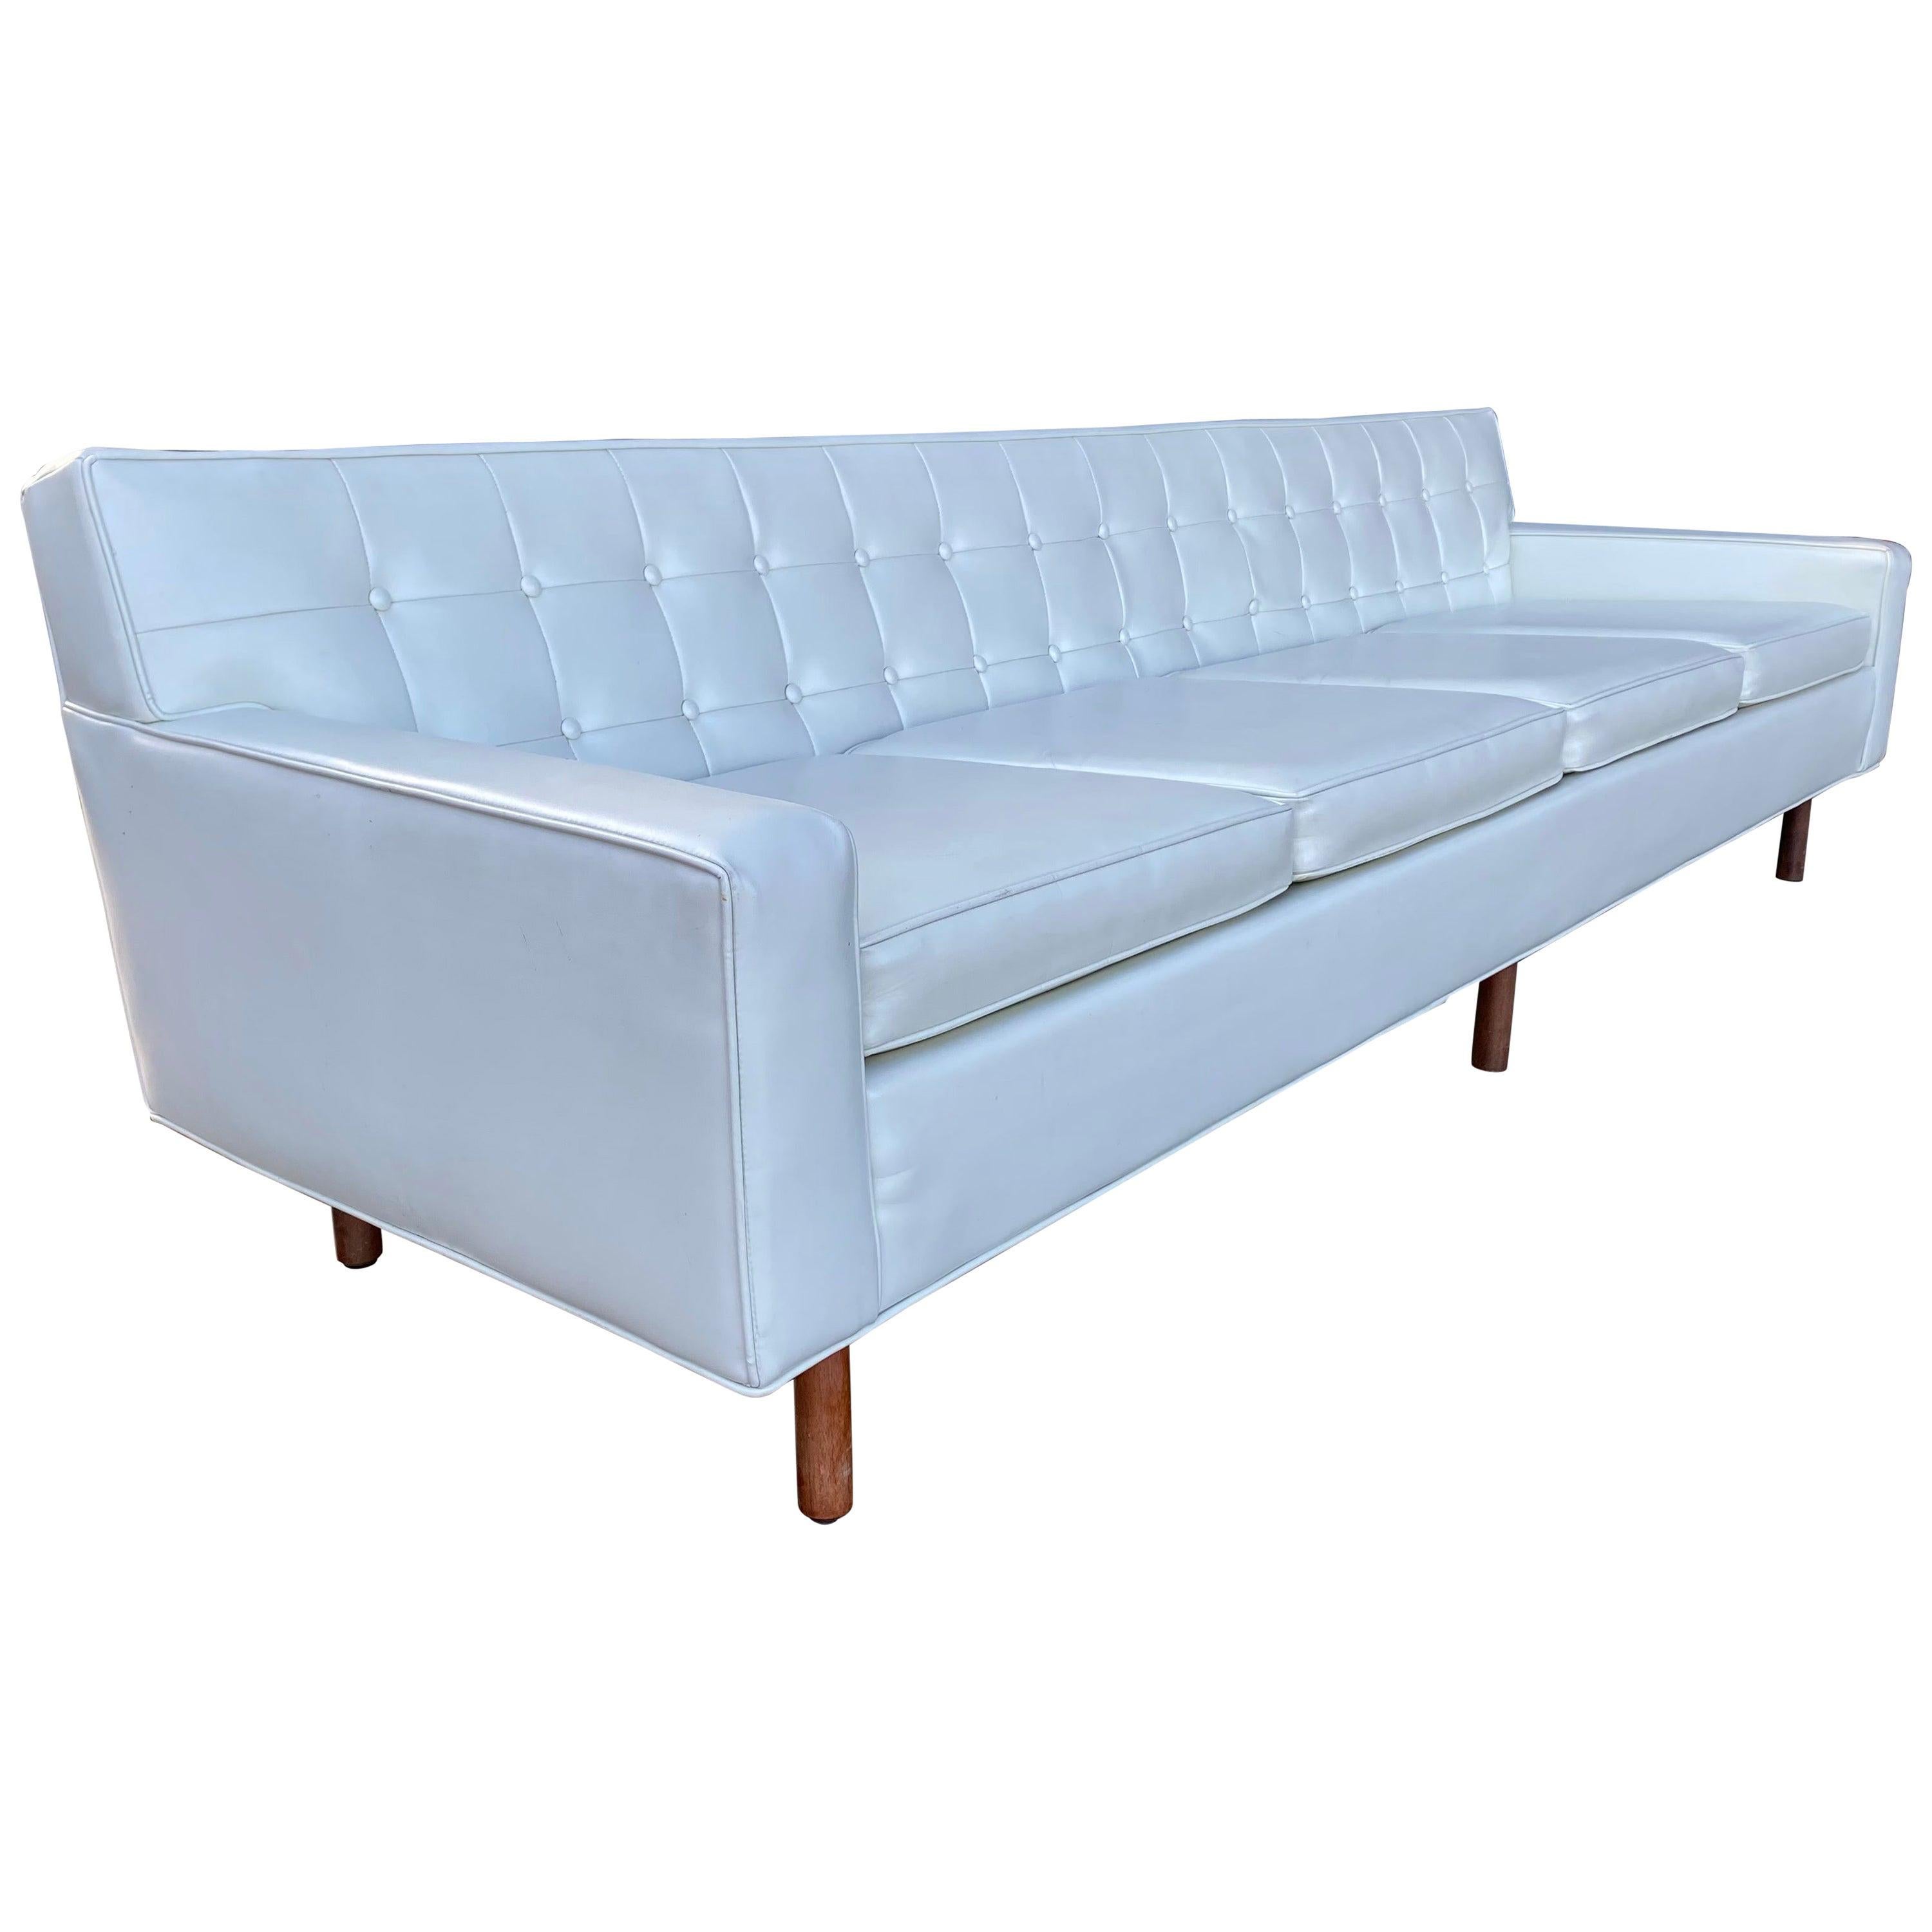 Stunning Button Tufted 4-Seat Sofa by Milo Baughman for Thayer Coggen